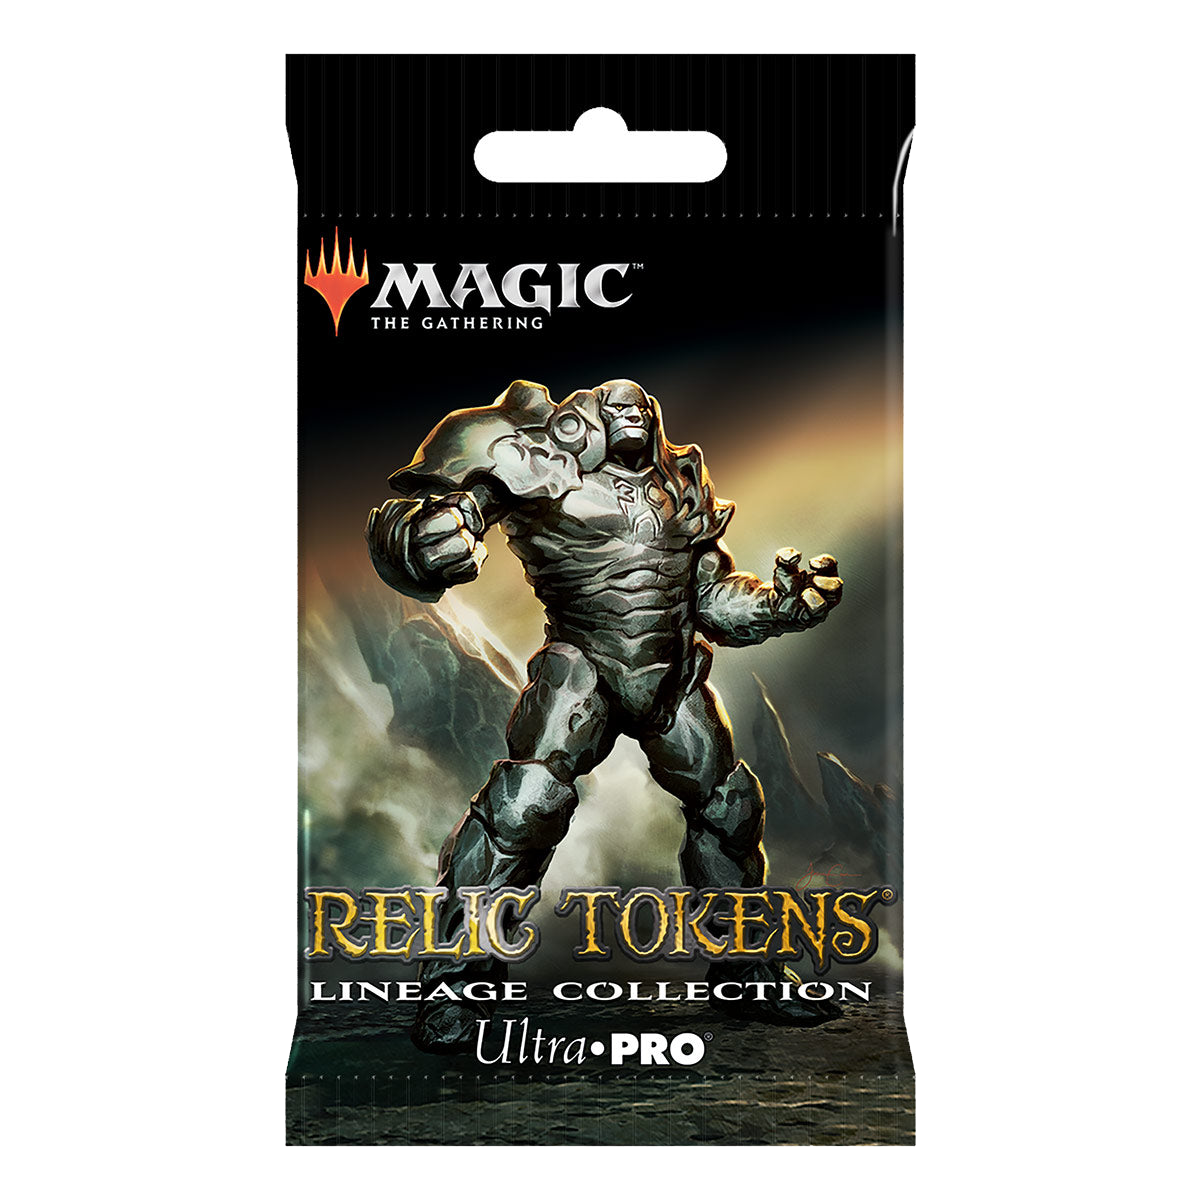 Relic Tokens Lineage Collection (Single Pack) for Magic: The Gathering | Ultra PRO International